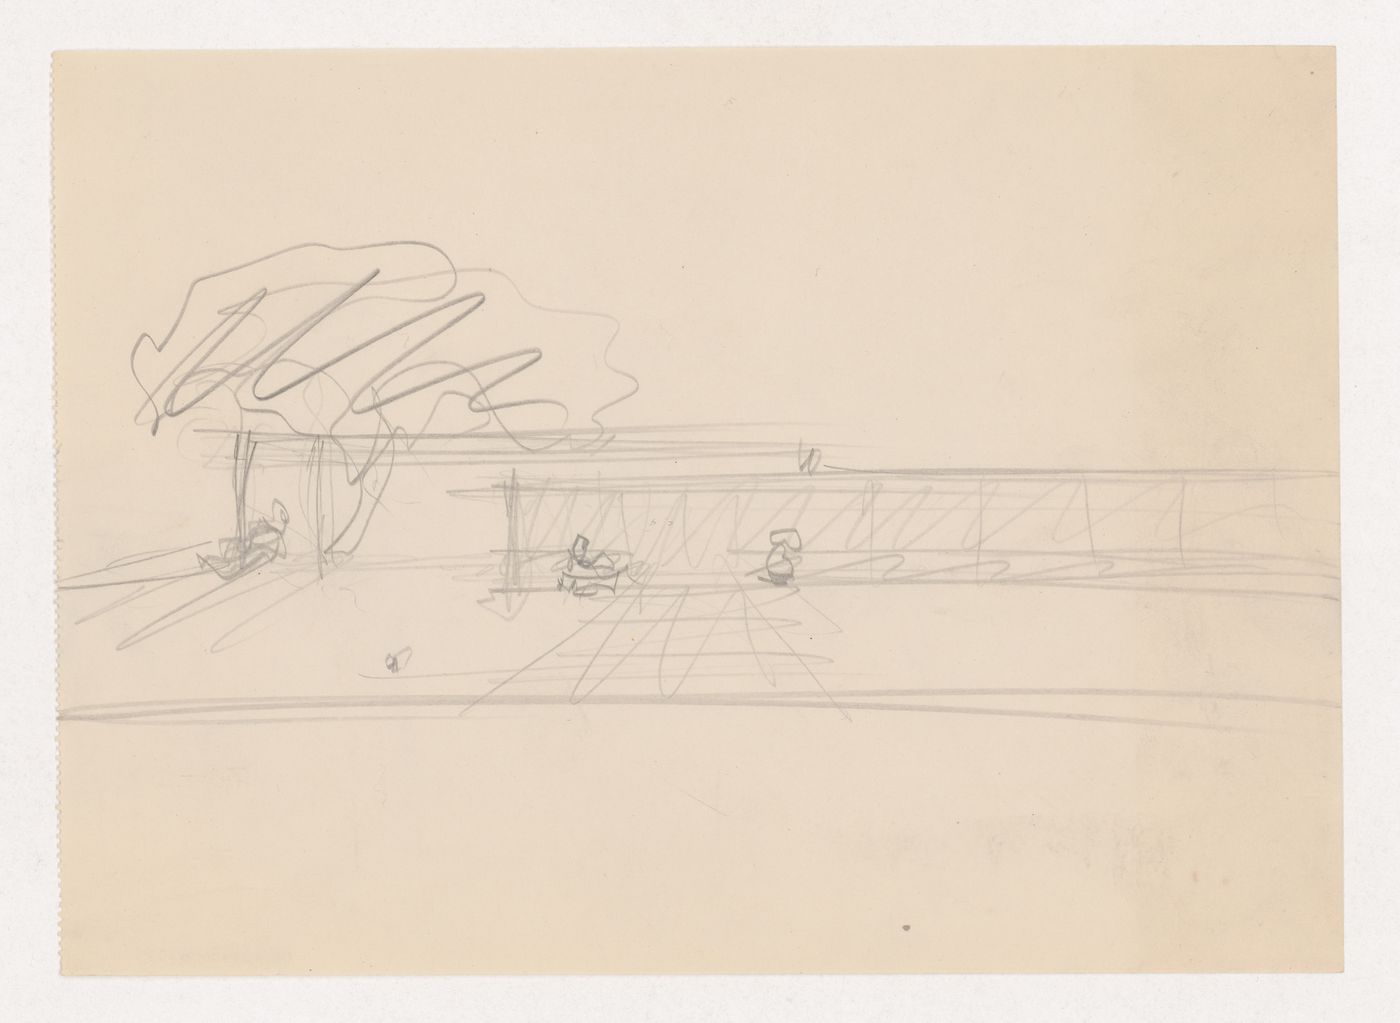 Perspective sketch for the Metallurgy Building, Illinois Institute of Technology, Chicago